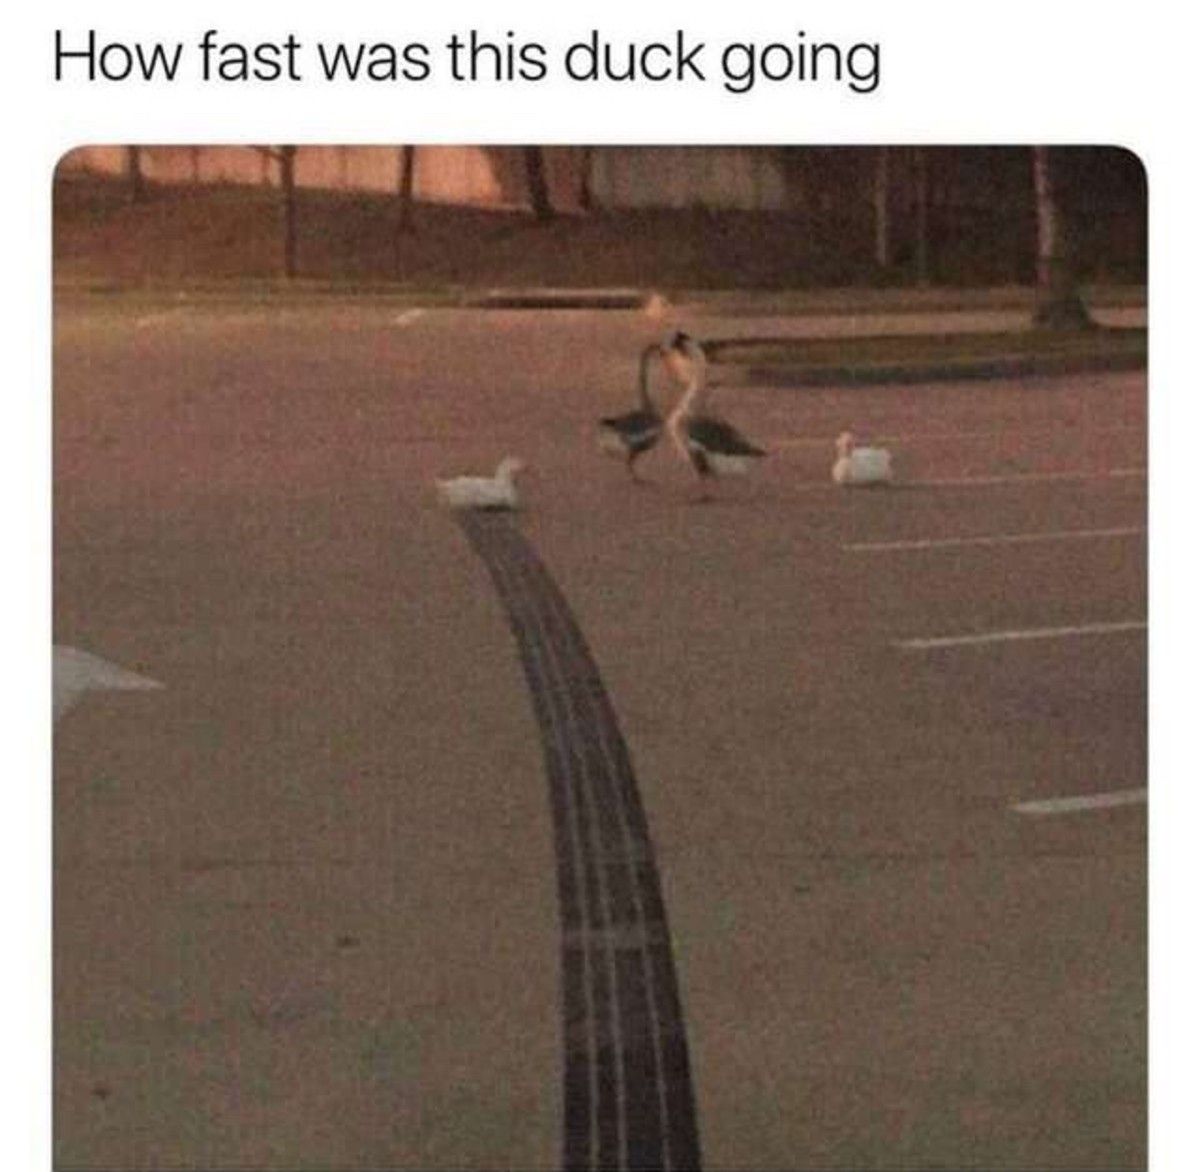 Ducks do not care about speed limit laws